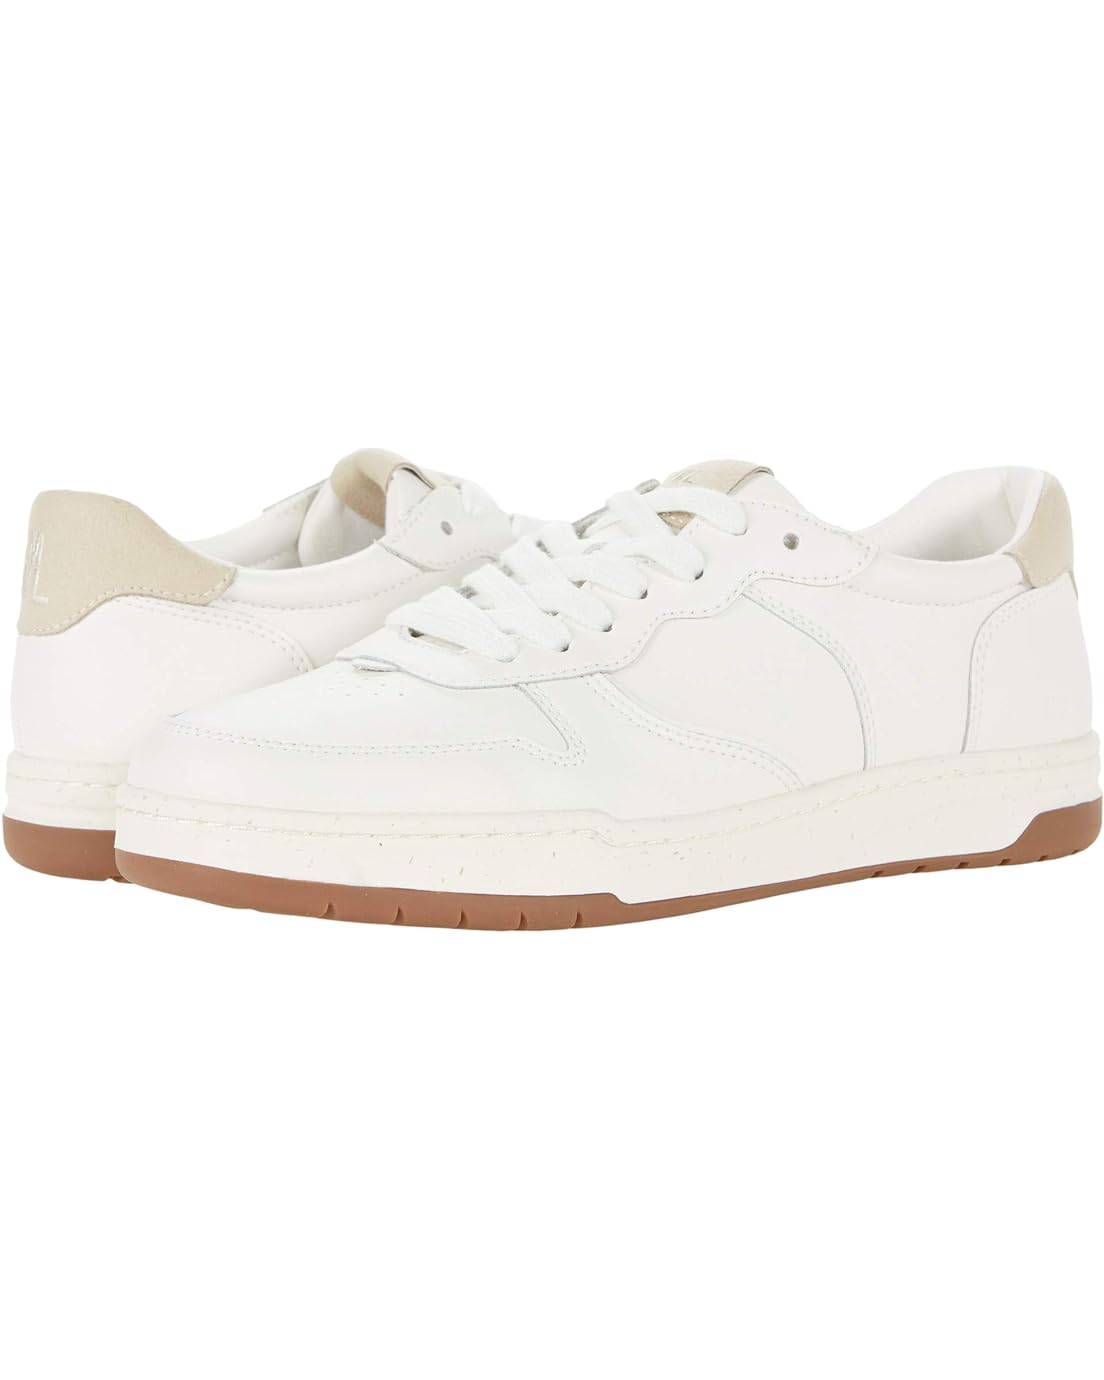 Madewell Court Sneakers in White Leather